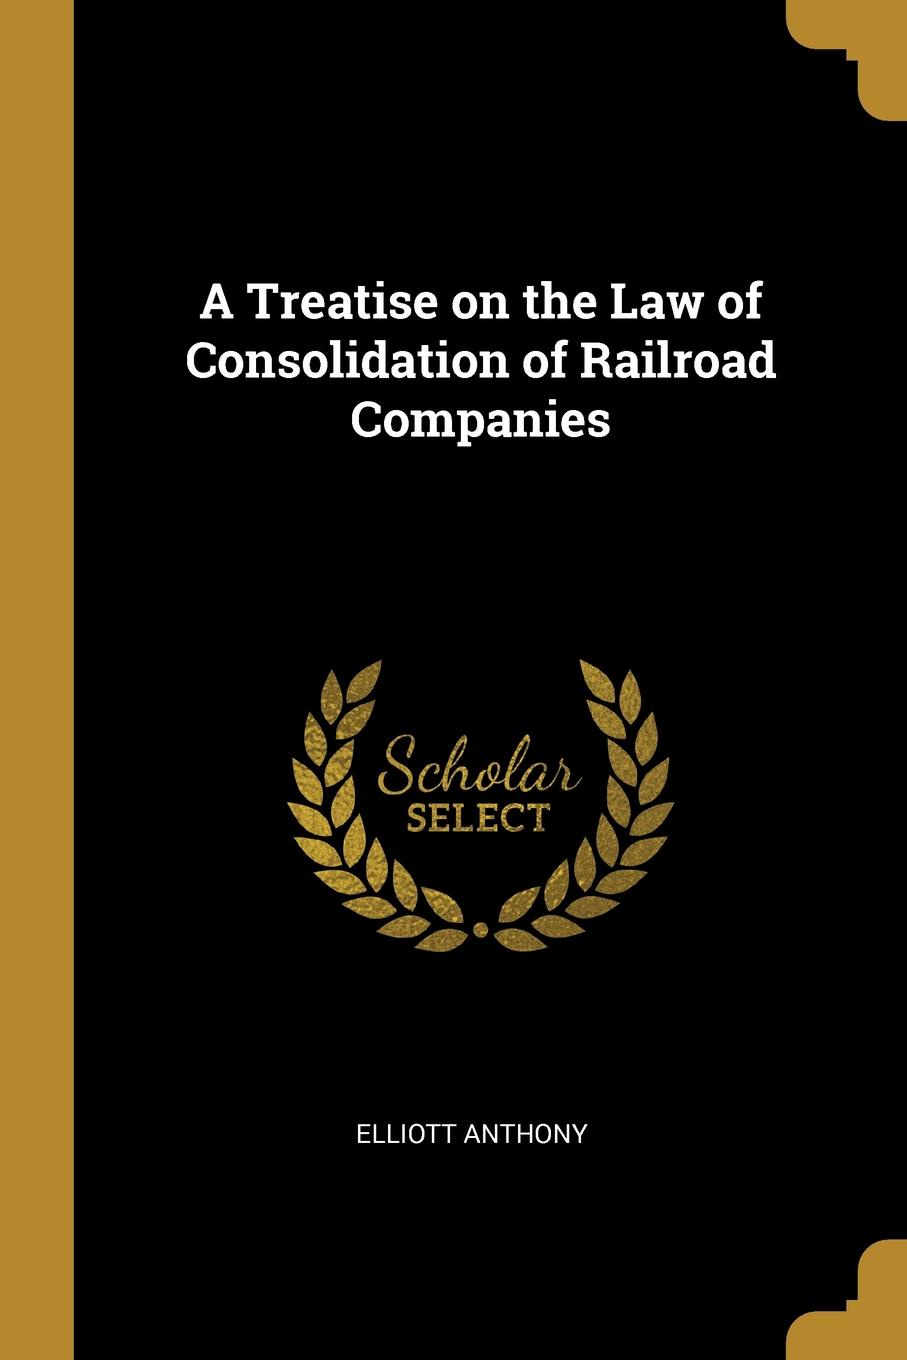 A Treatise on the Law of Consolidation of Railroad Companies